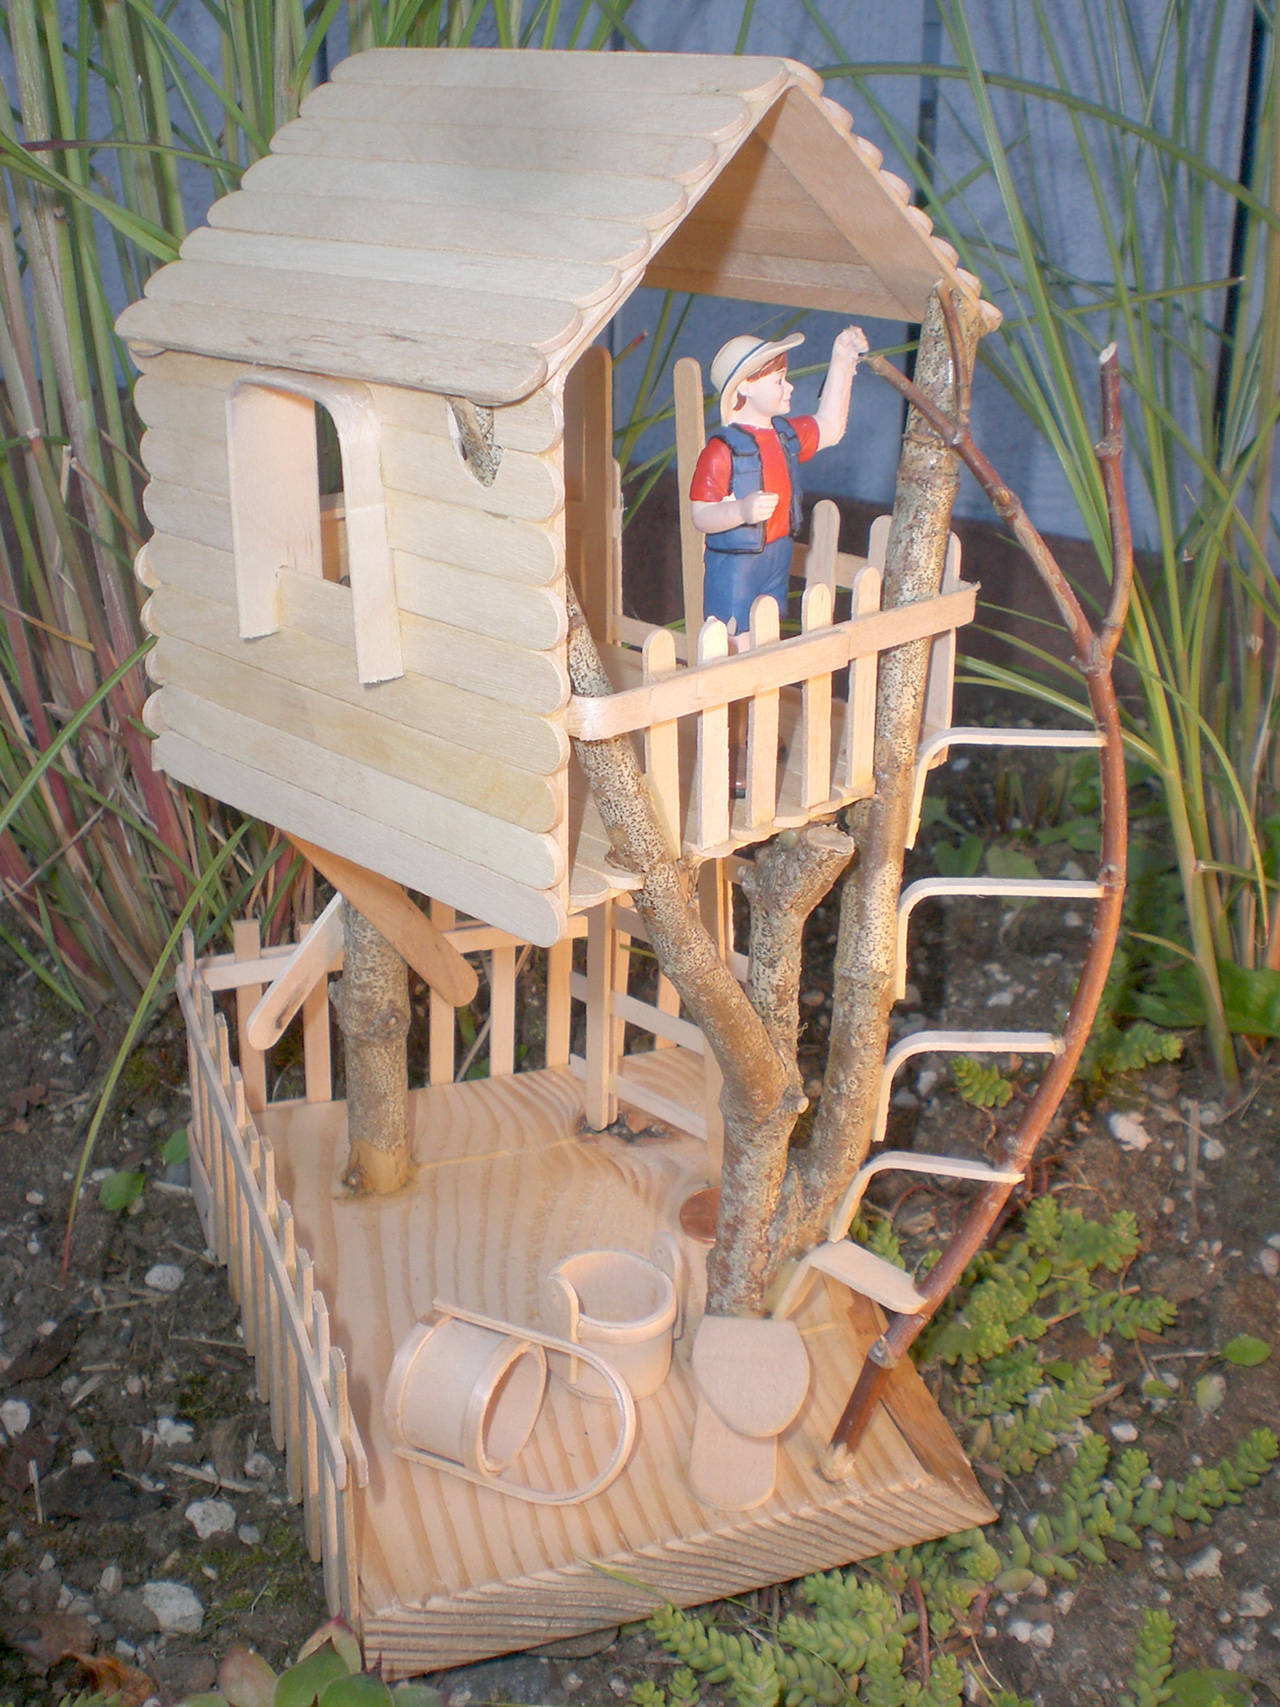 Best Treehouse 2 by Brad Griffin will be on display in Sequim.